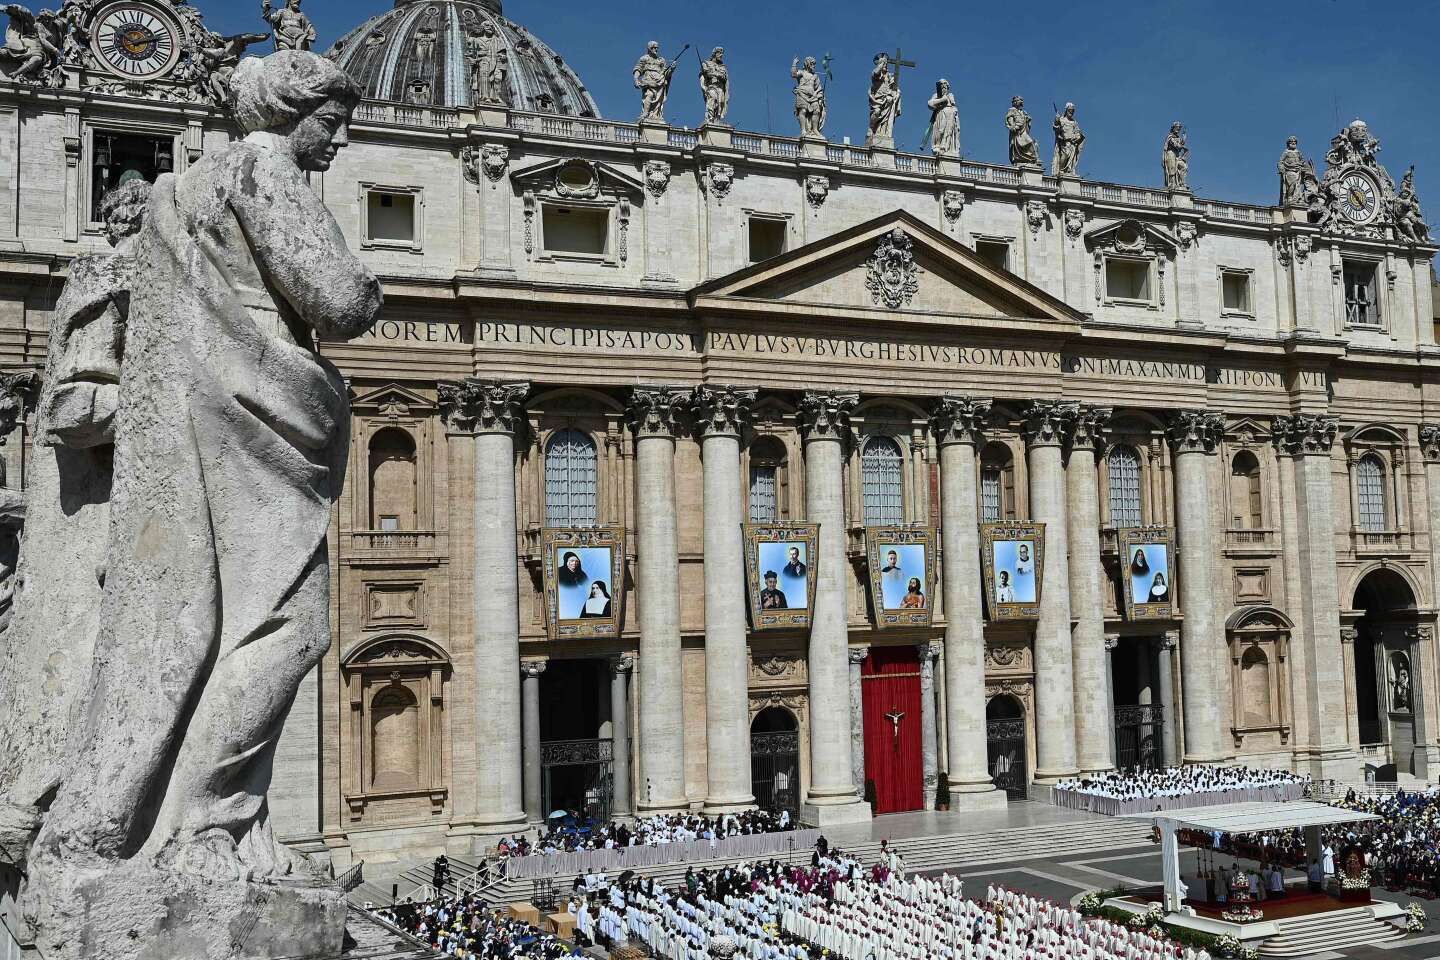 Ten New Catholic ‘Saints’ Declared by Pope Francis